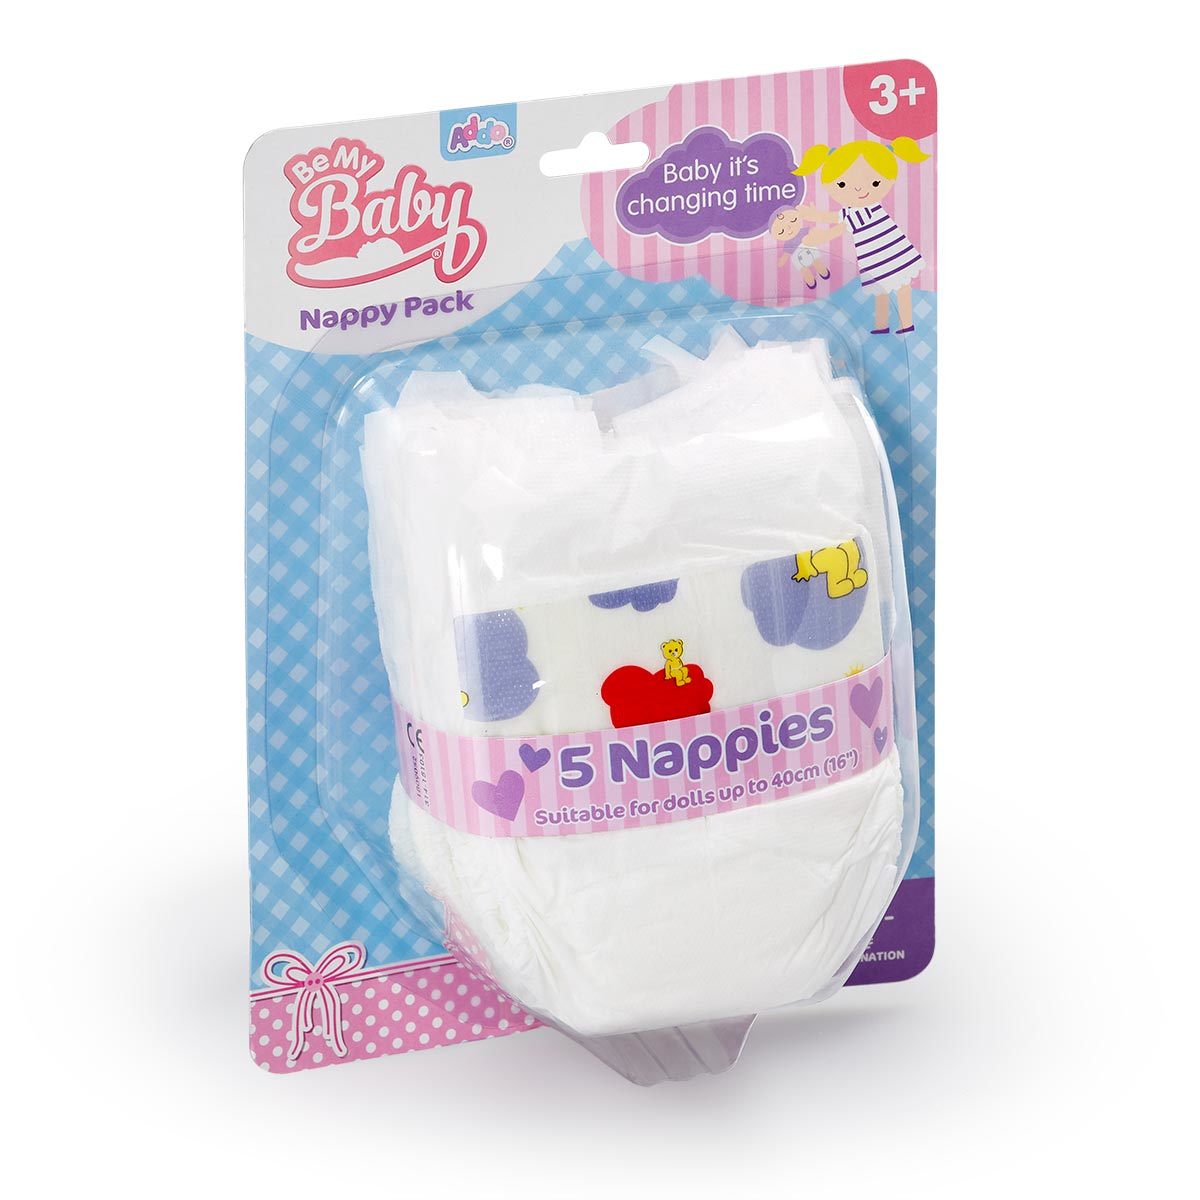 Be My Baby Nappy Pack - 5 Nappies